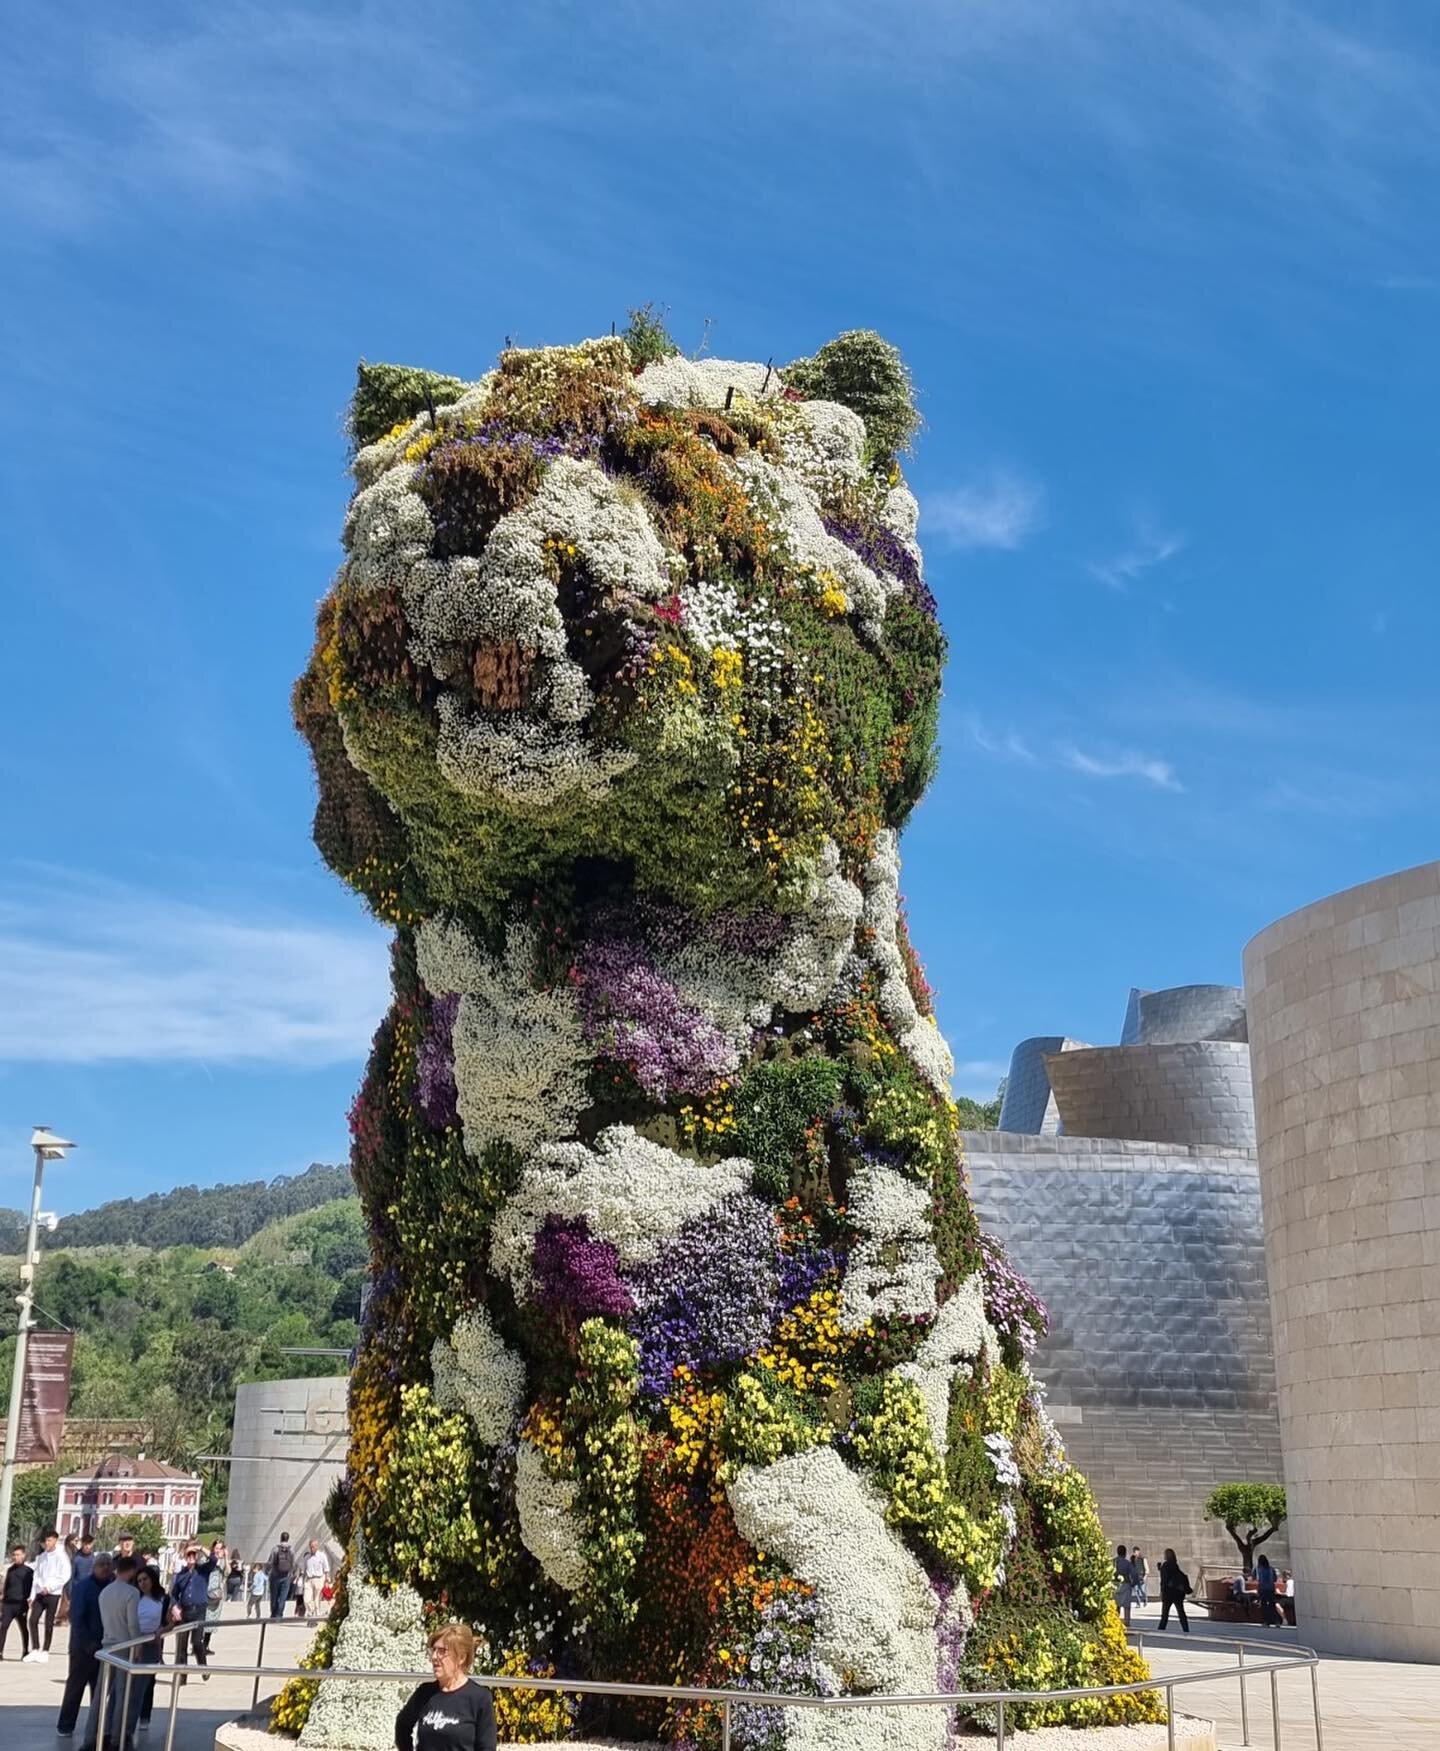 Back from a trip to Bilbao, Spain, including a trip to the Guggenheim Museum where we were greeted by the fabulous 'Puppy' sculpture by Jeff Koons.  It's the world largest flower sculpture and was created in 1992 using new computer modelling techniqu